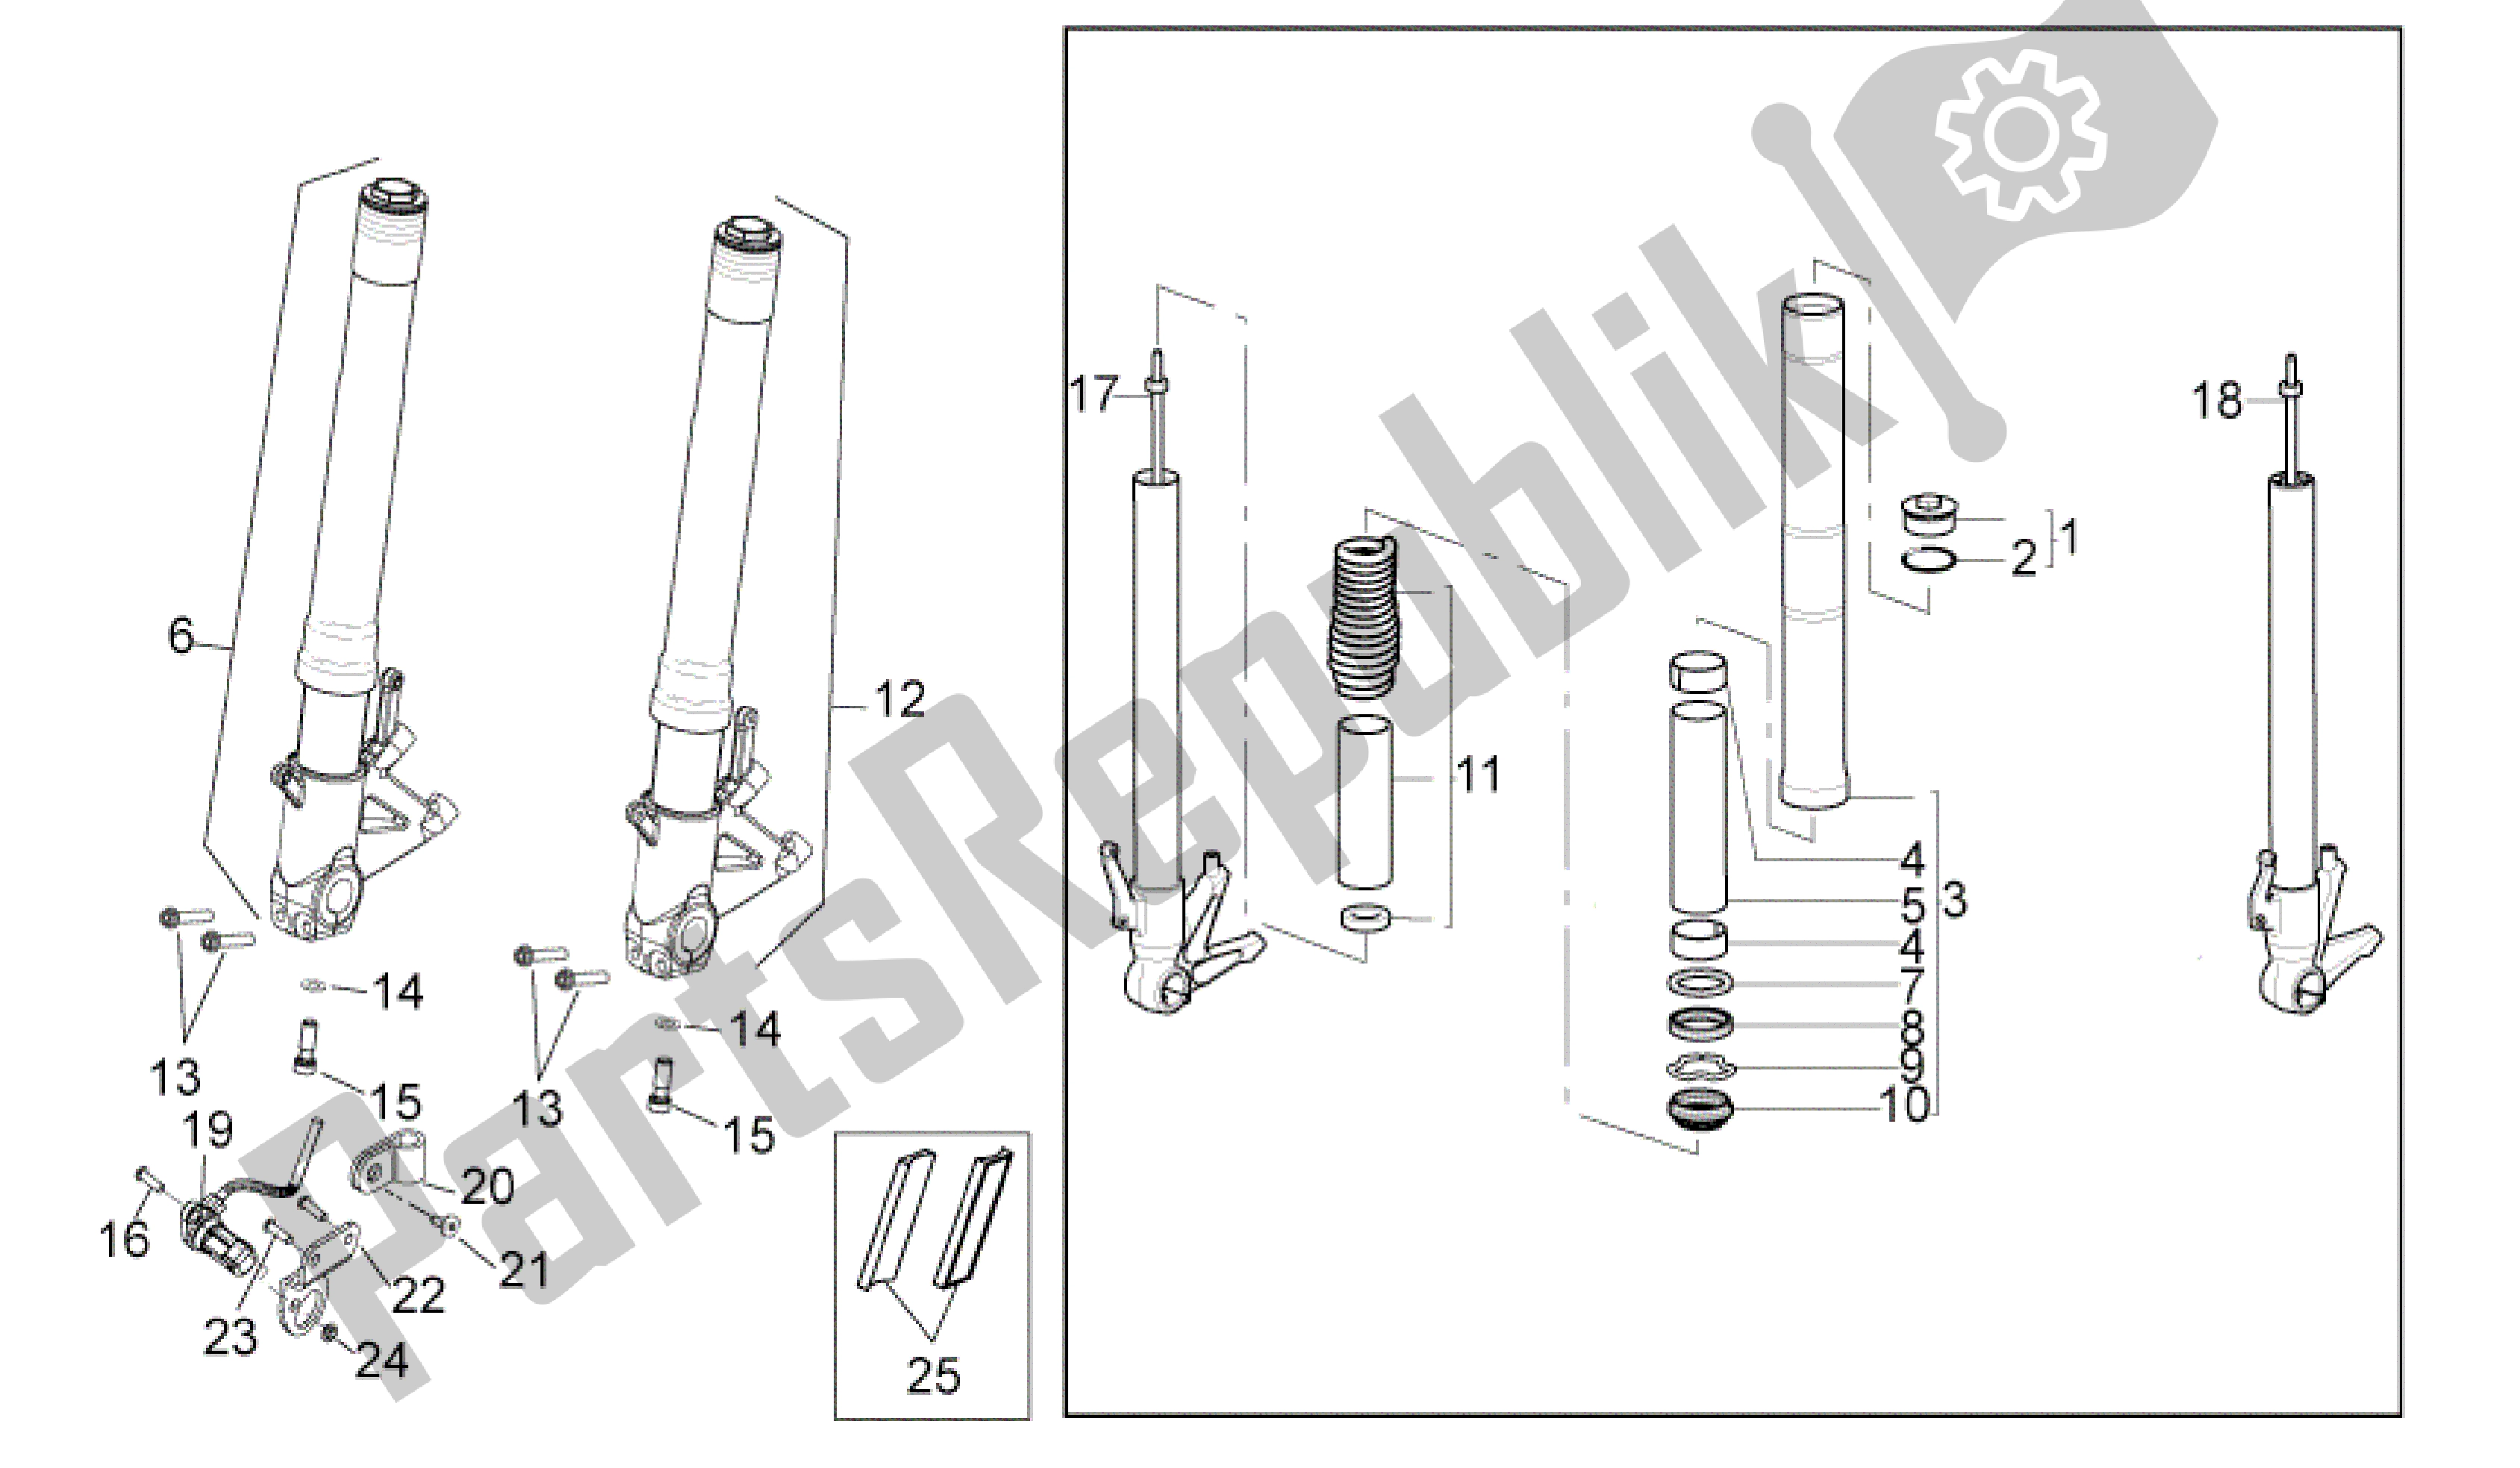 All parts for the Fron Fork Ii of the Aprilia Mana 850 2009 - 2011